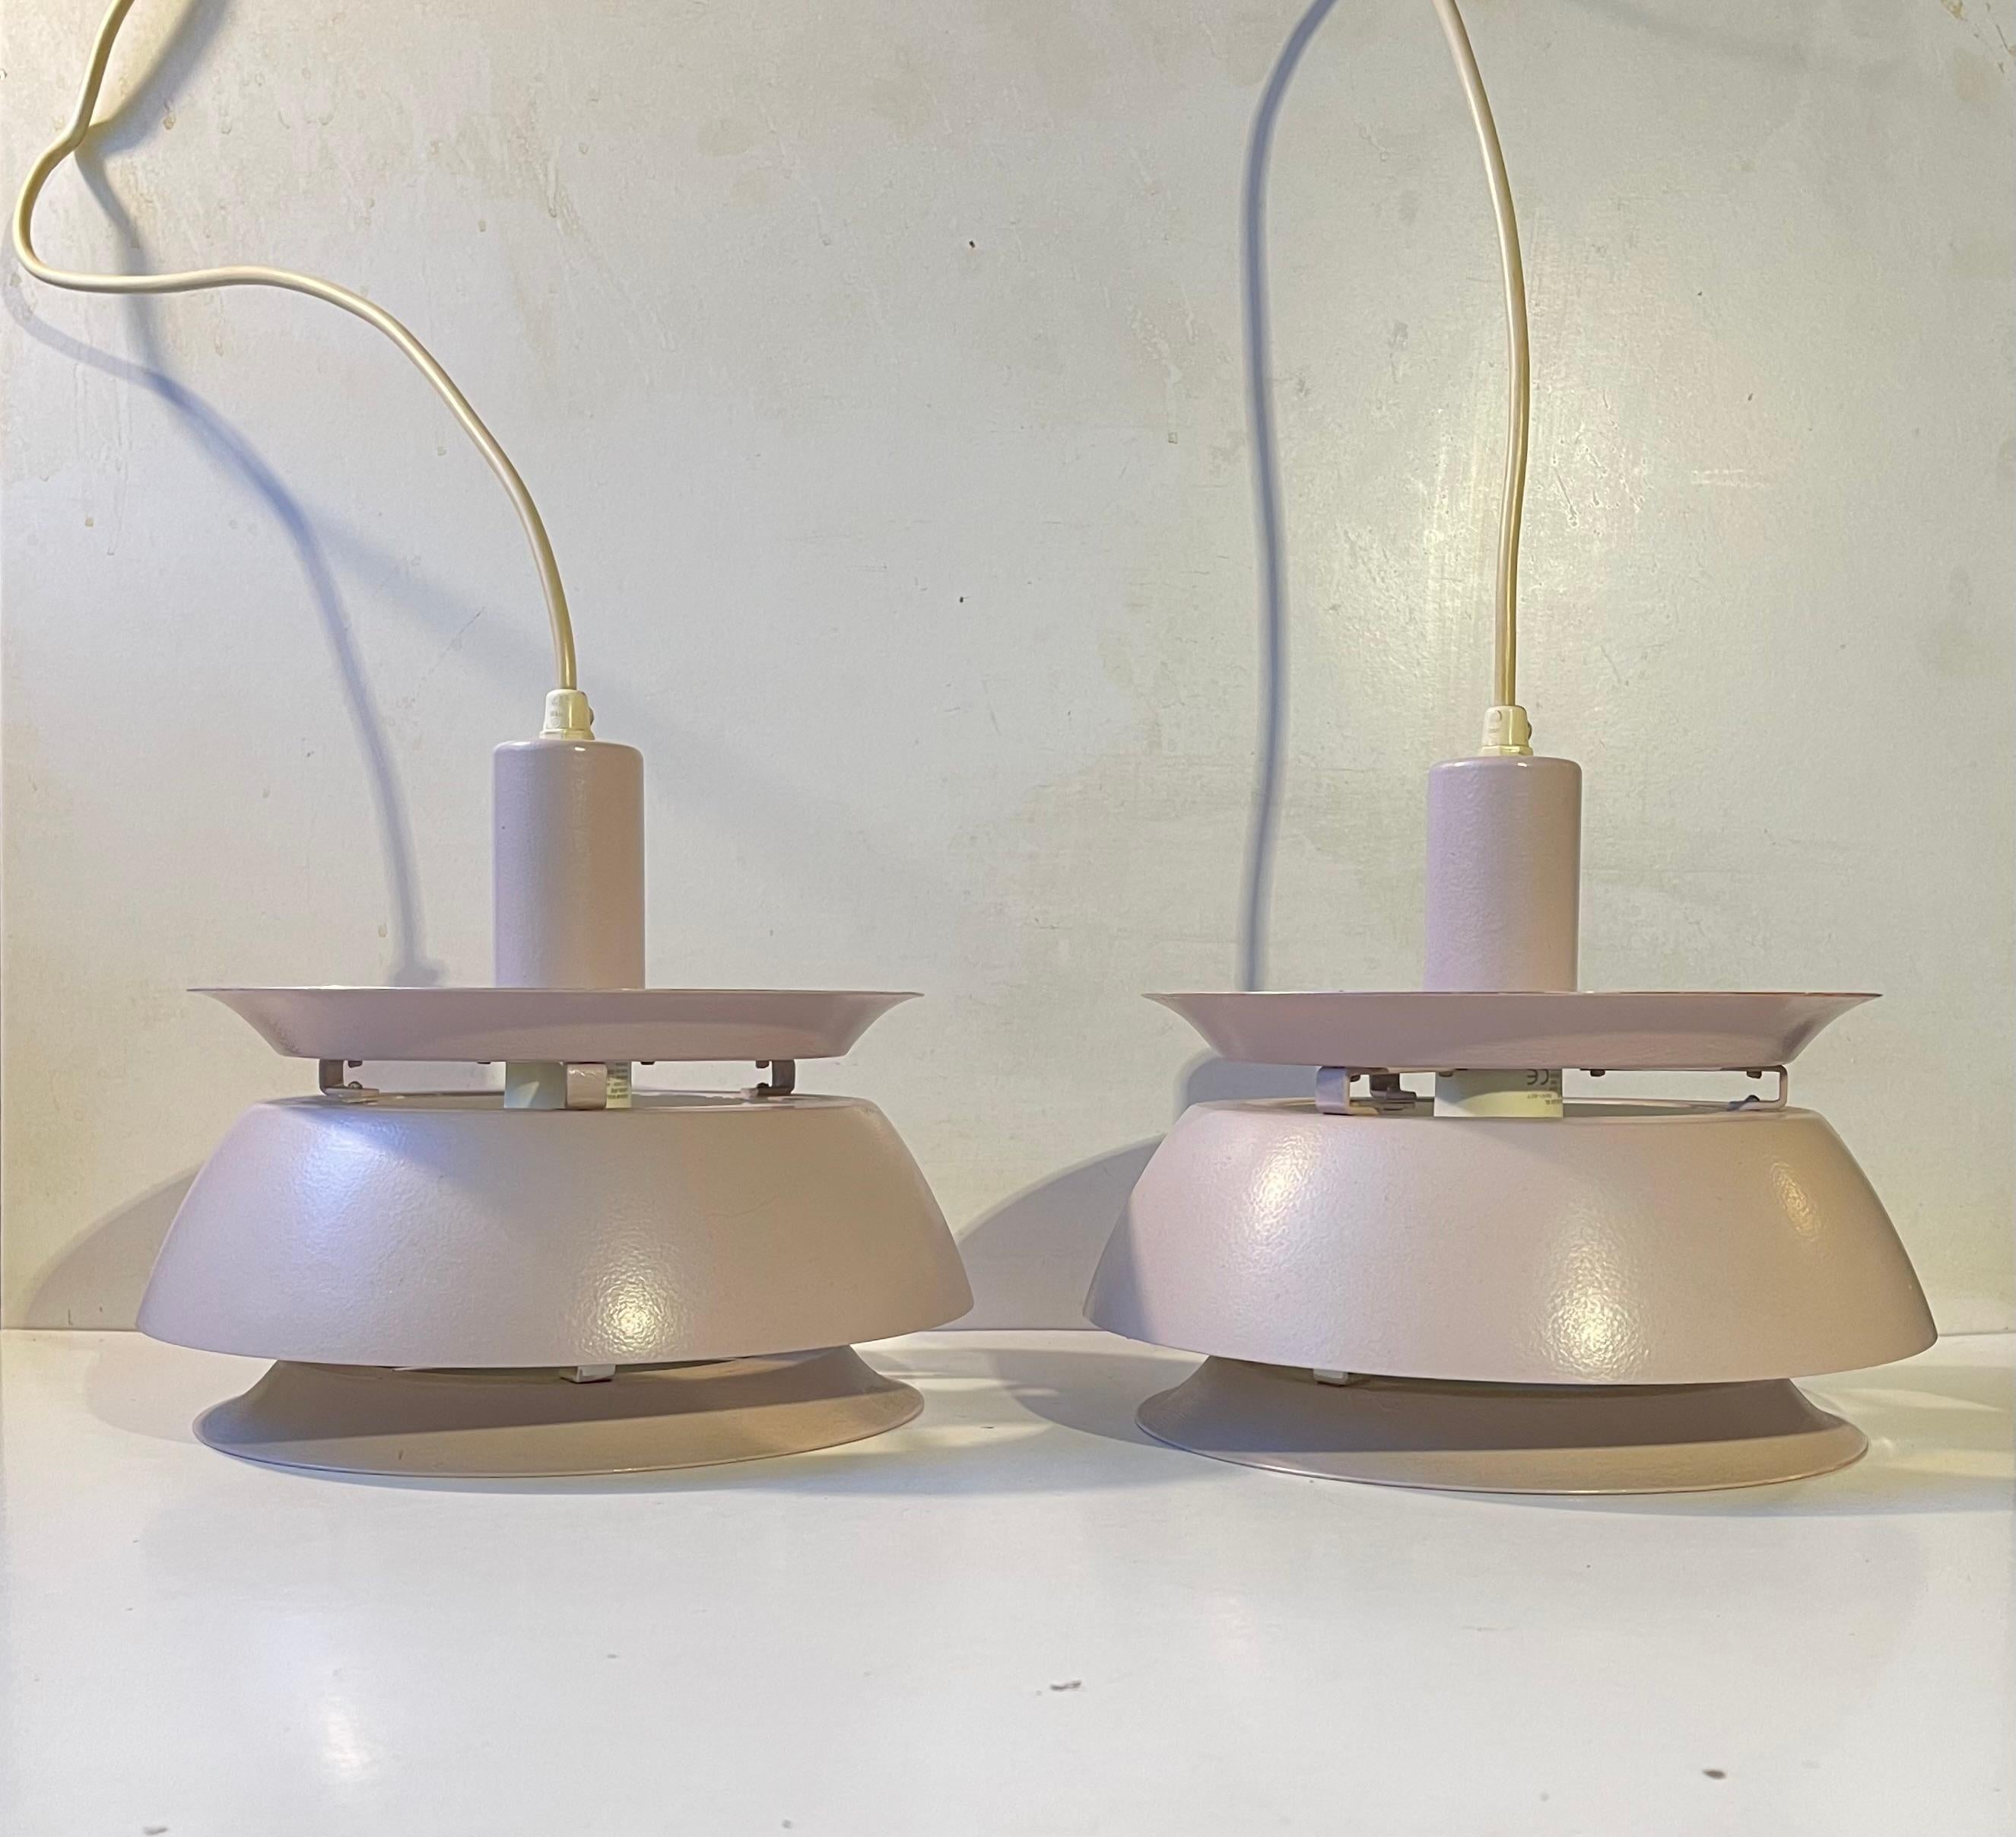 A pair multiple tiered aluminum pendant lights by Vitrika in Denmark. Designed and made during the early 1970s in a style reminiscent of Carl Thore and Jørn Utzon. The lights features white interior shades and a textured, possibly, refinished light